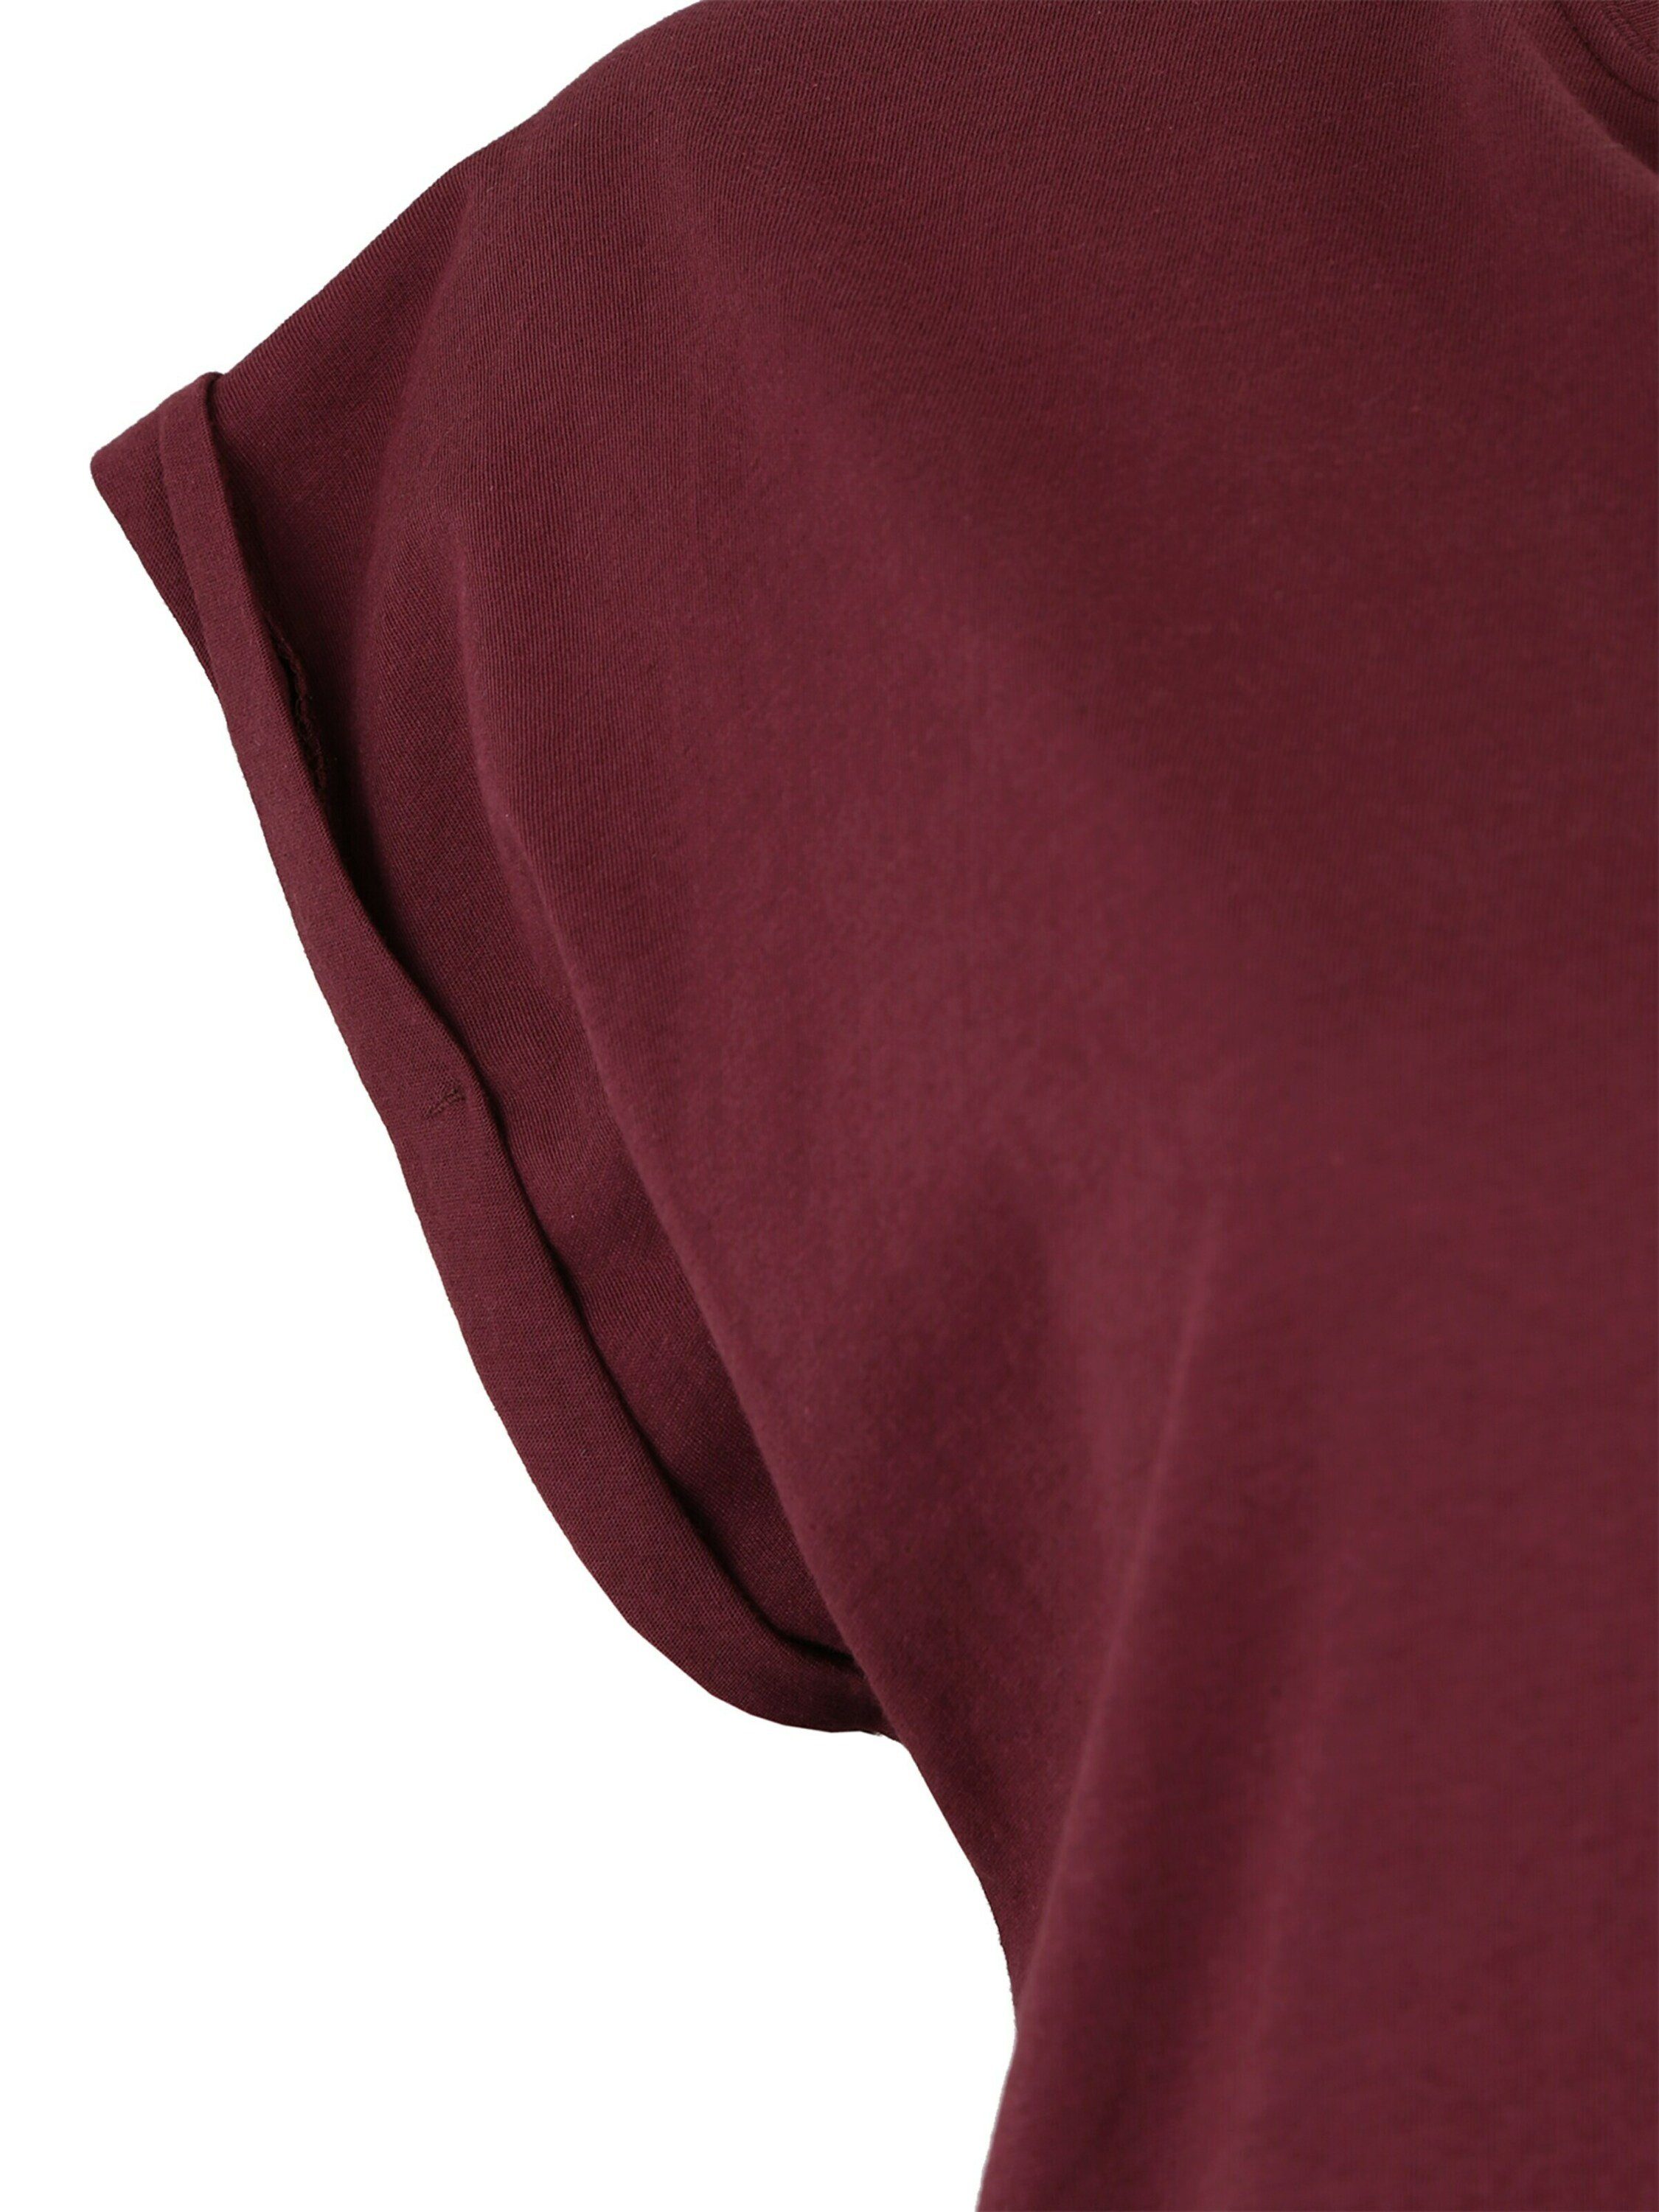 Plain/ohne brombeer Details, T-Shirt (1-tlg) CLASSICS URBAN Weiteres Detail